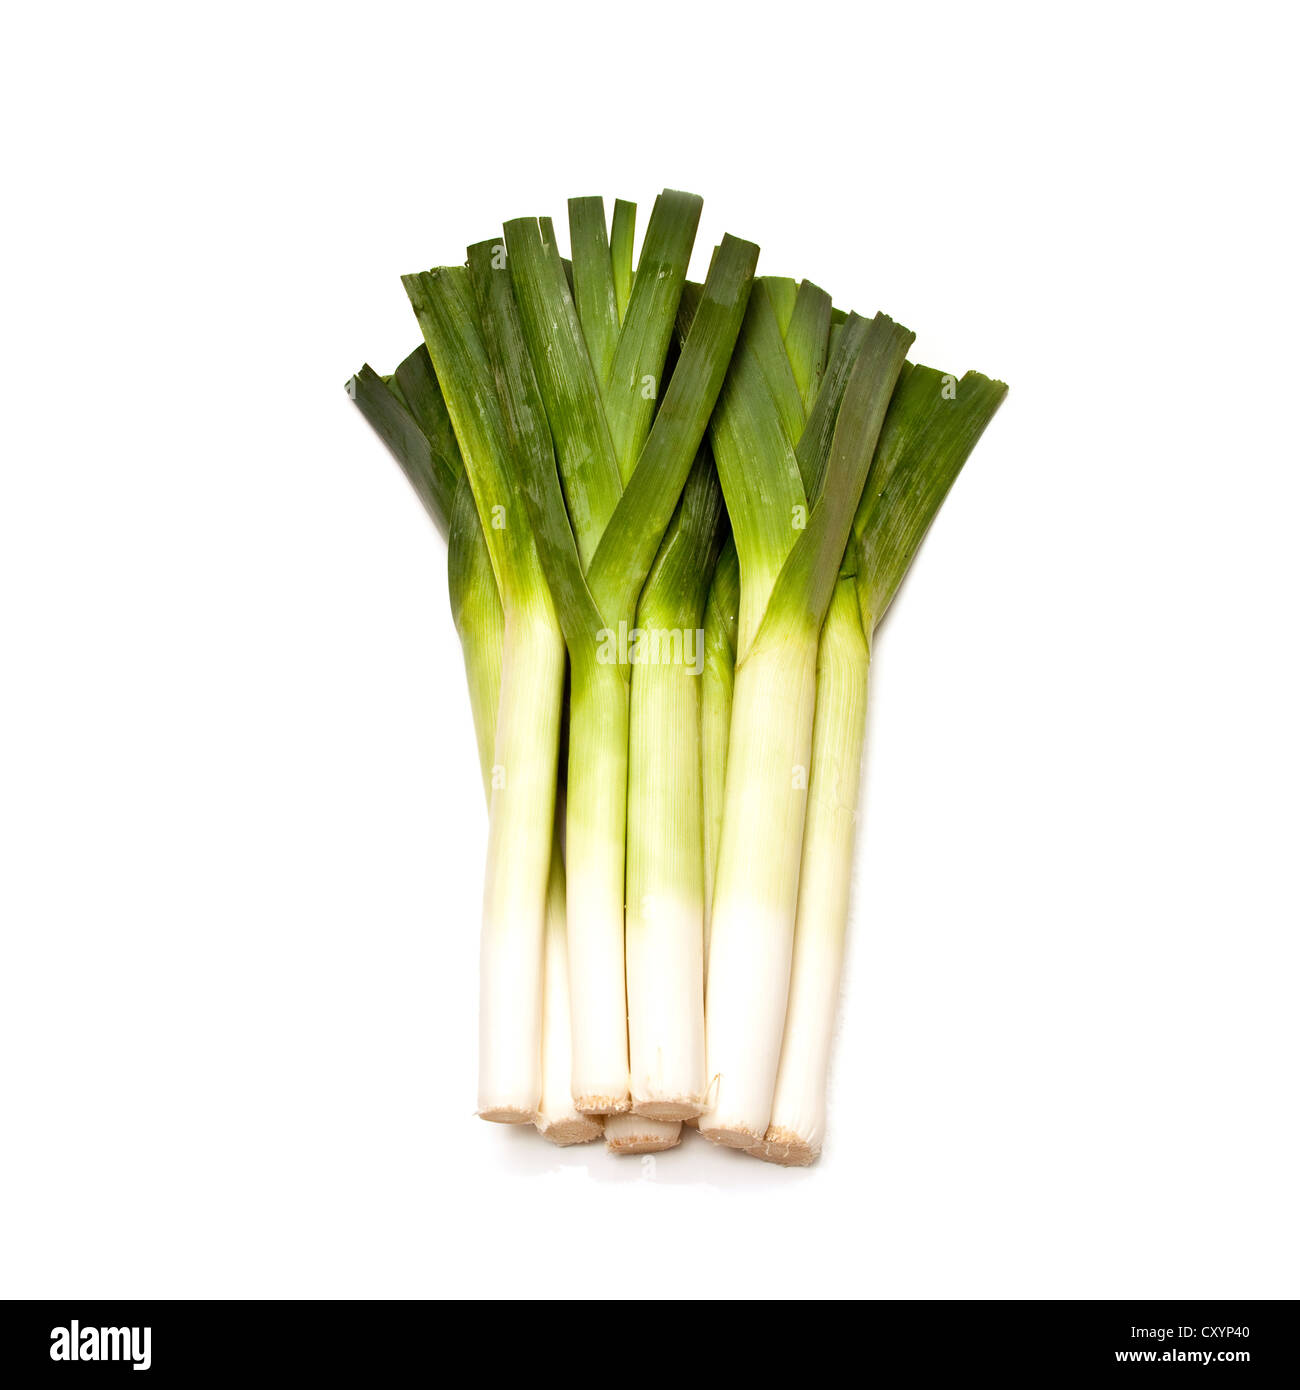 Bunch of leeks isolated on a white studio background. Stock Photo